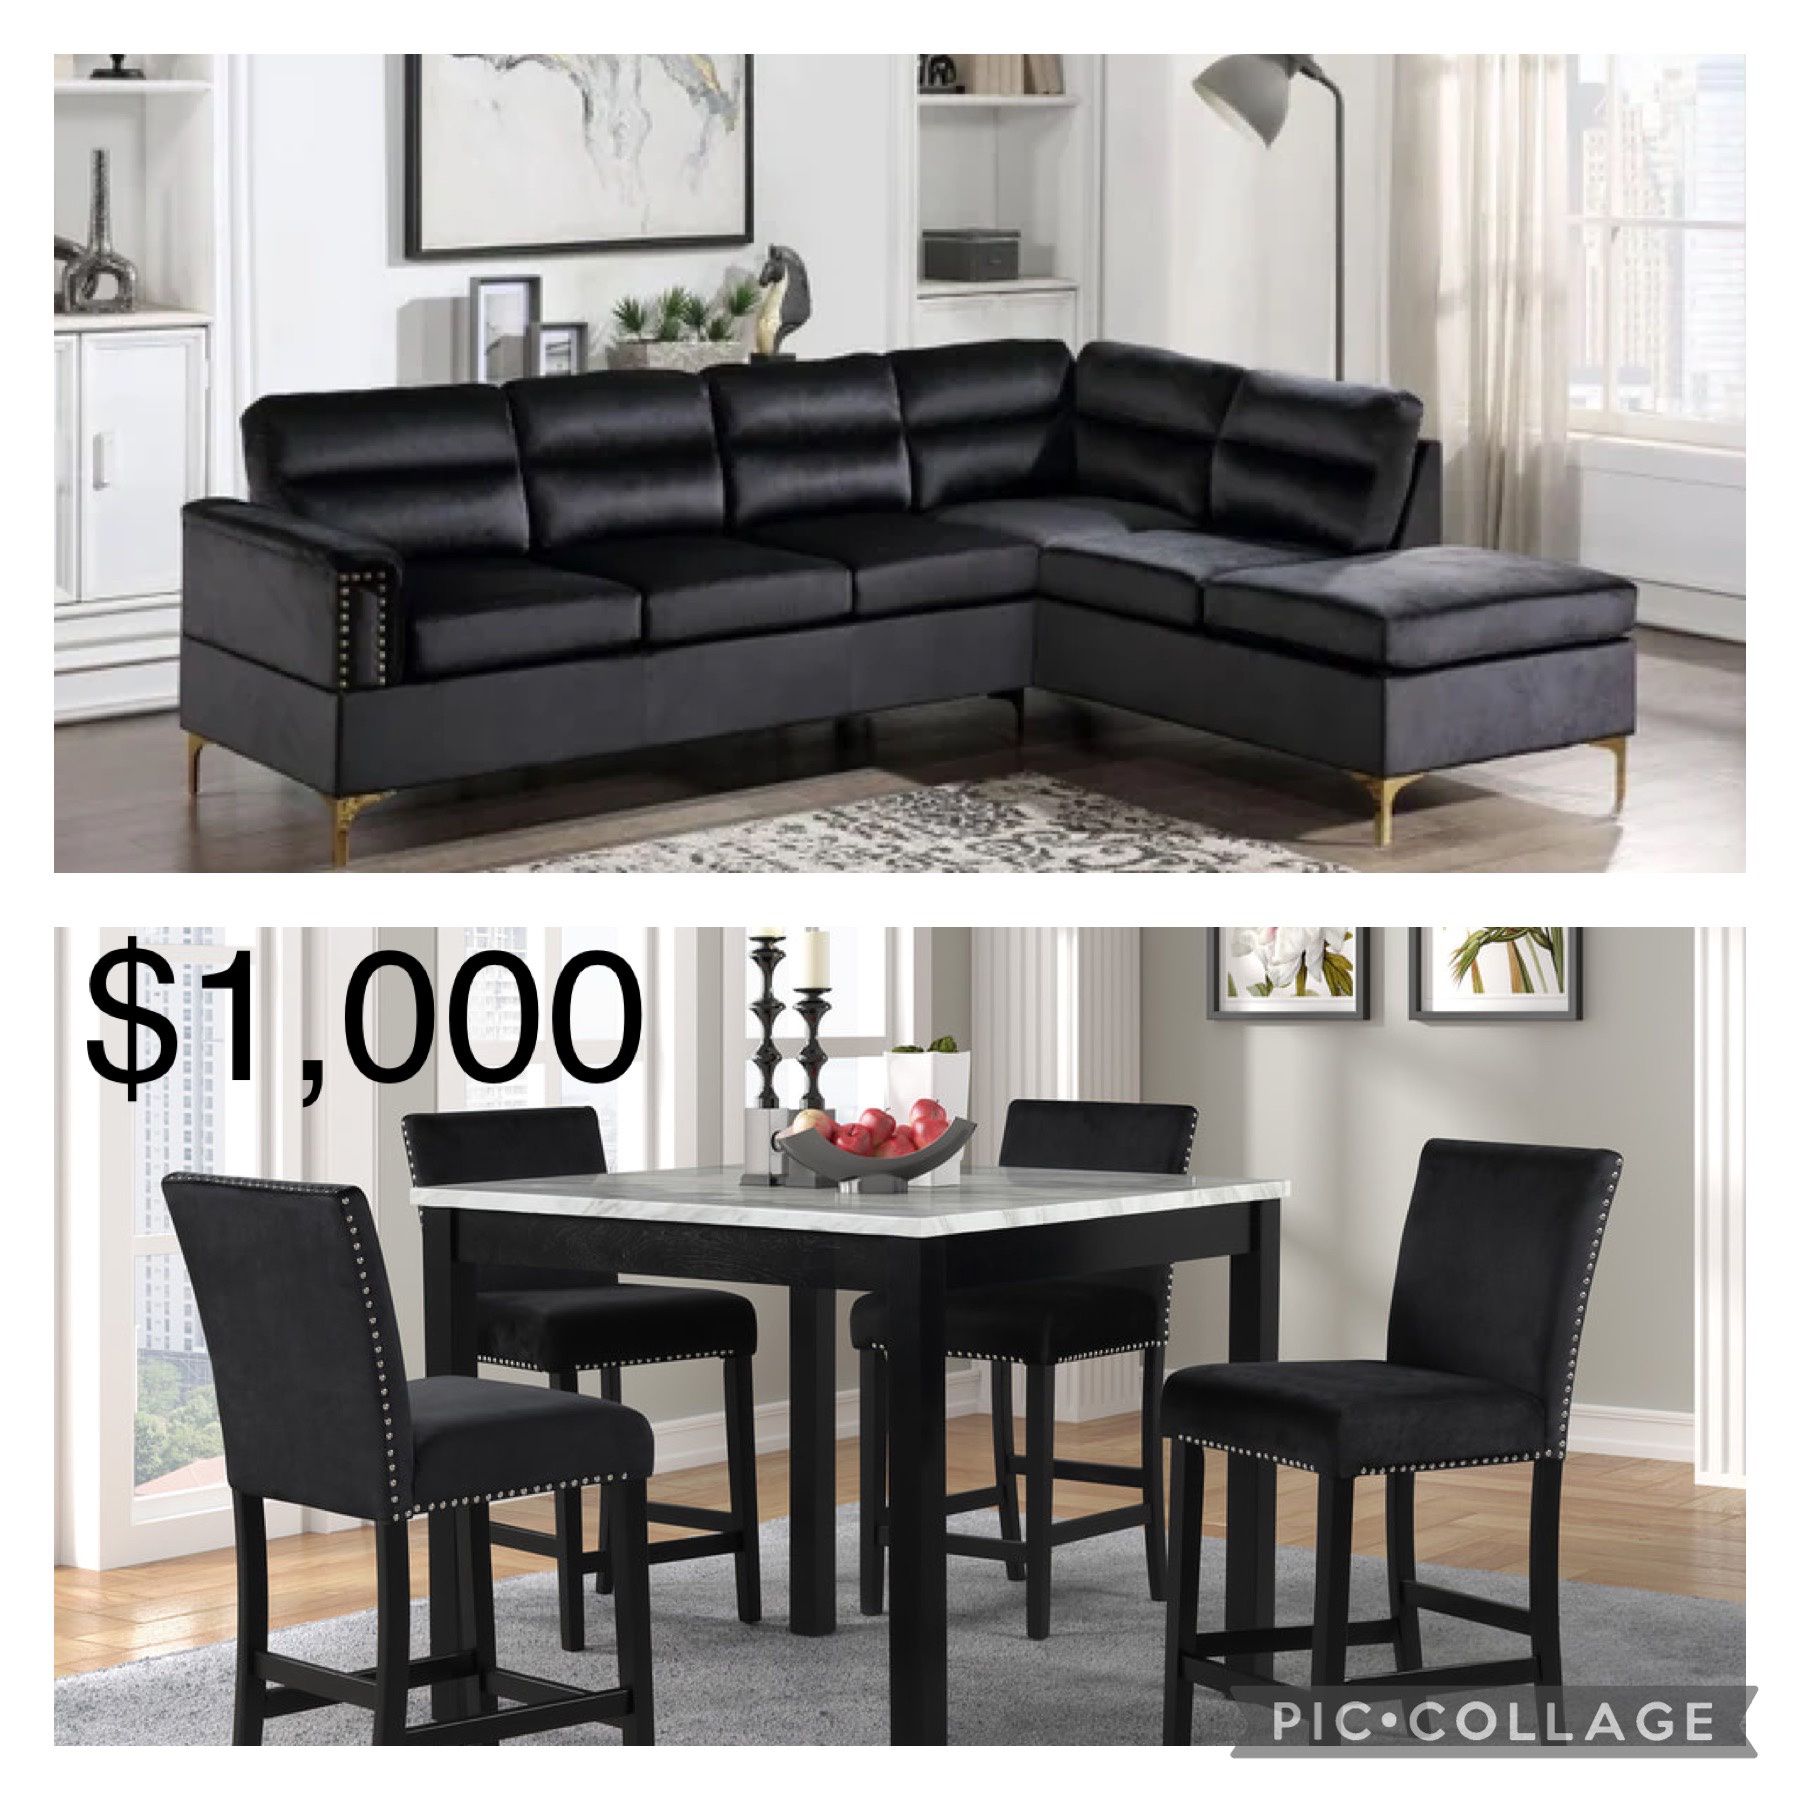 Furniture Package! Sale